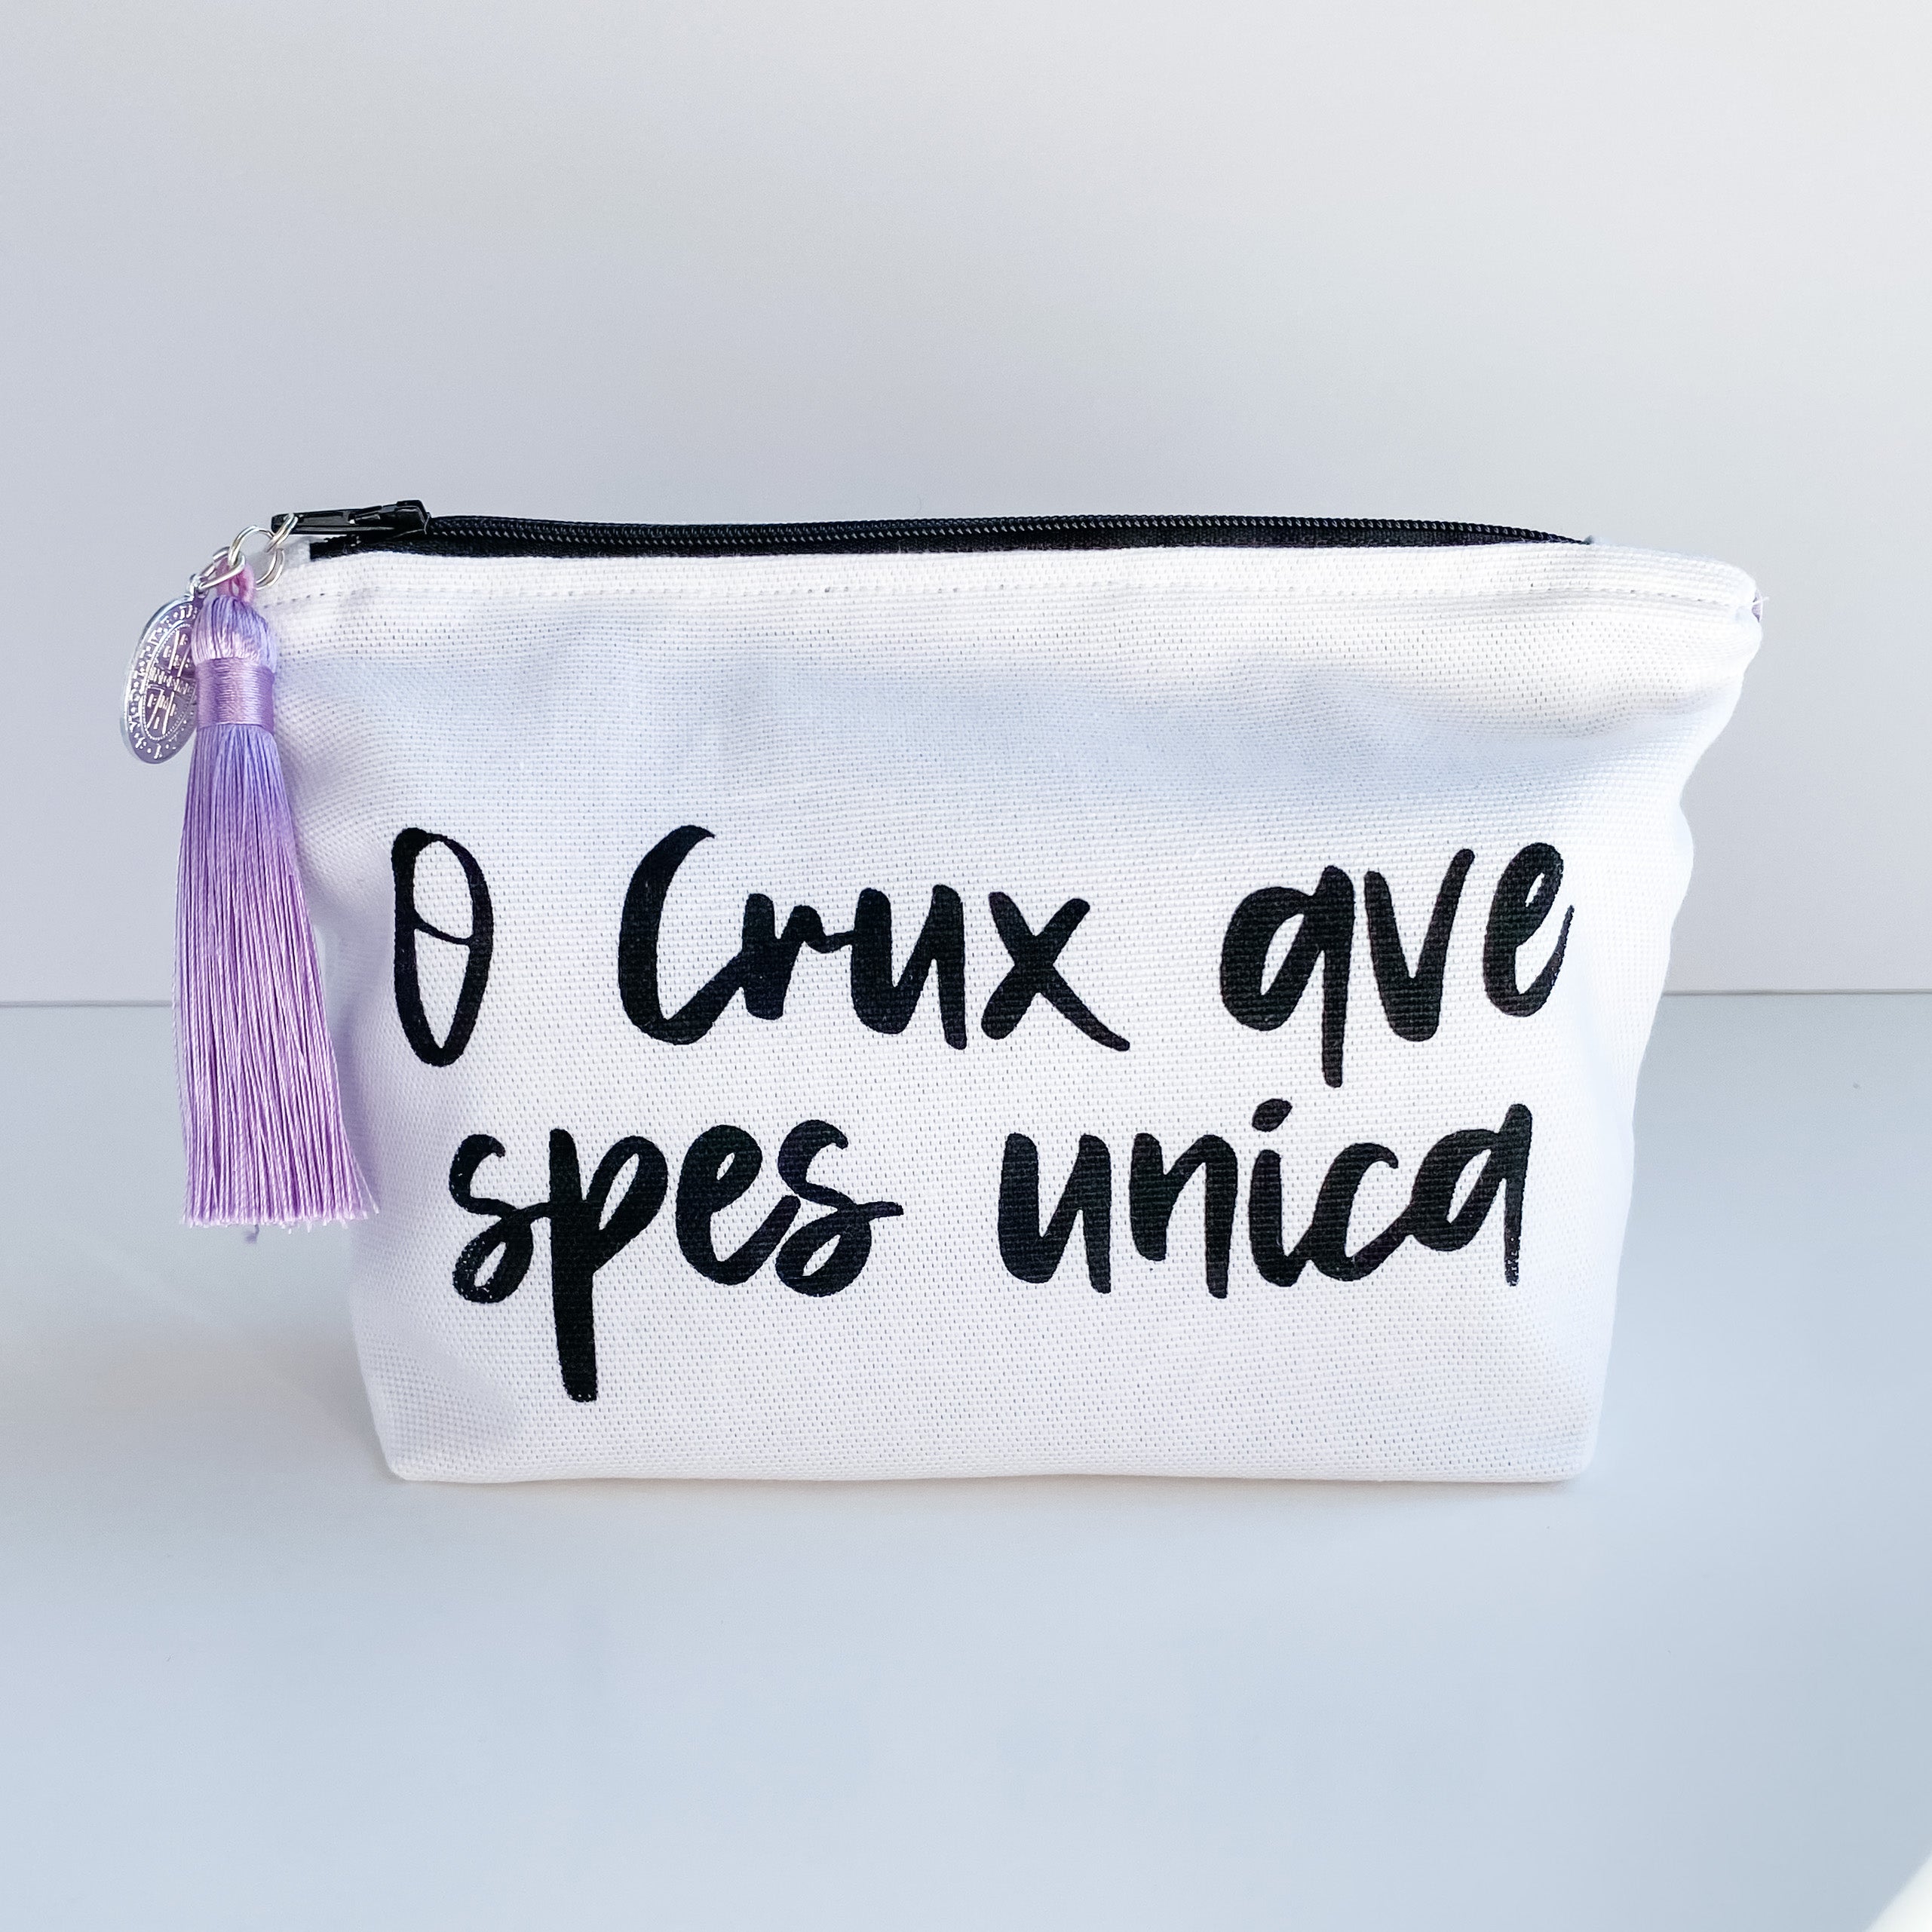 [DISCONTINUED] Tribulation Kit with "O Crux Ave" Zipper Pouch